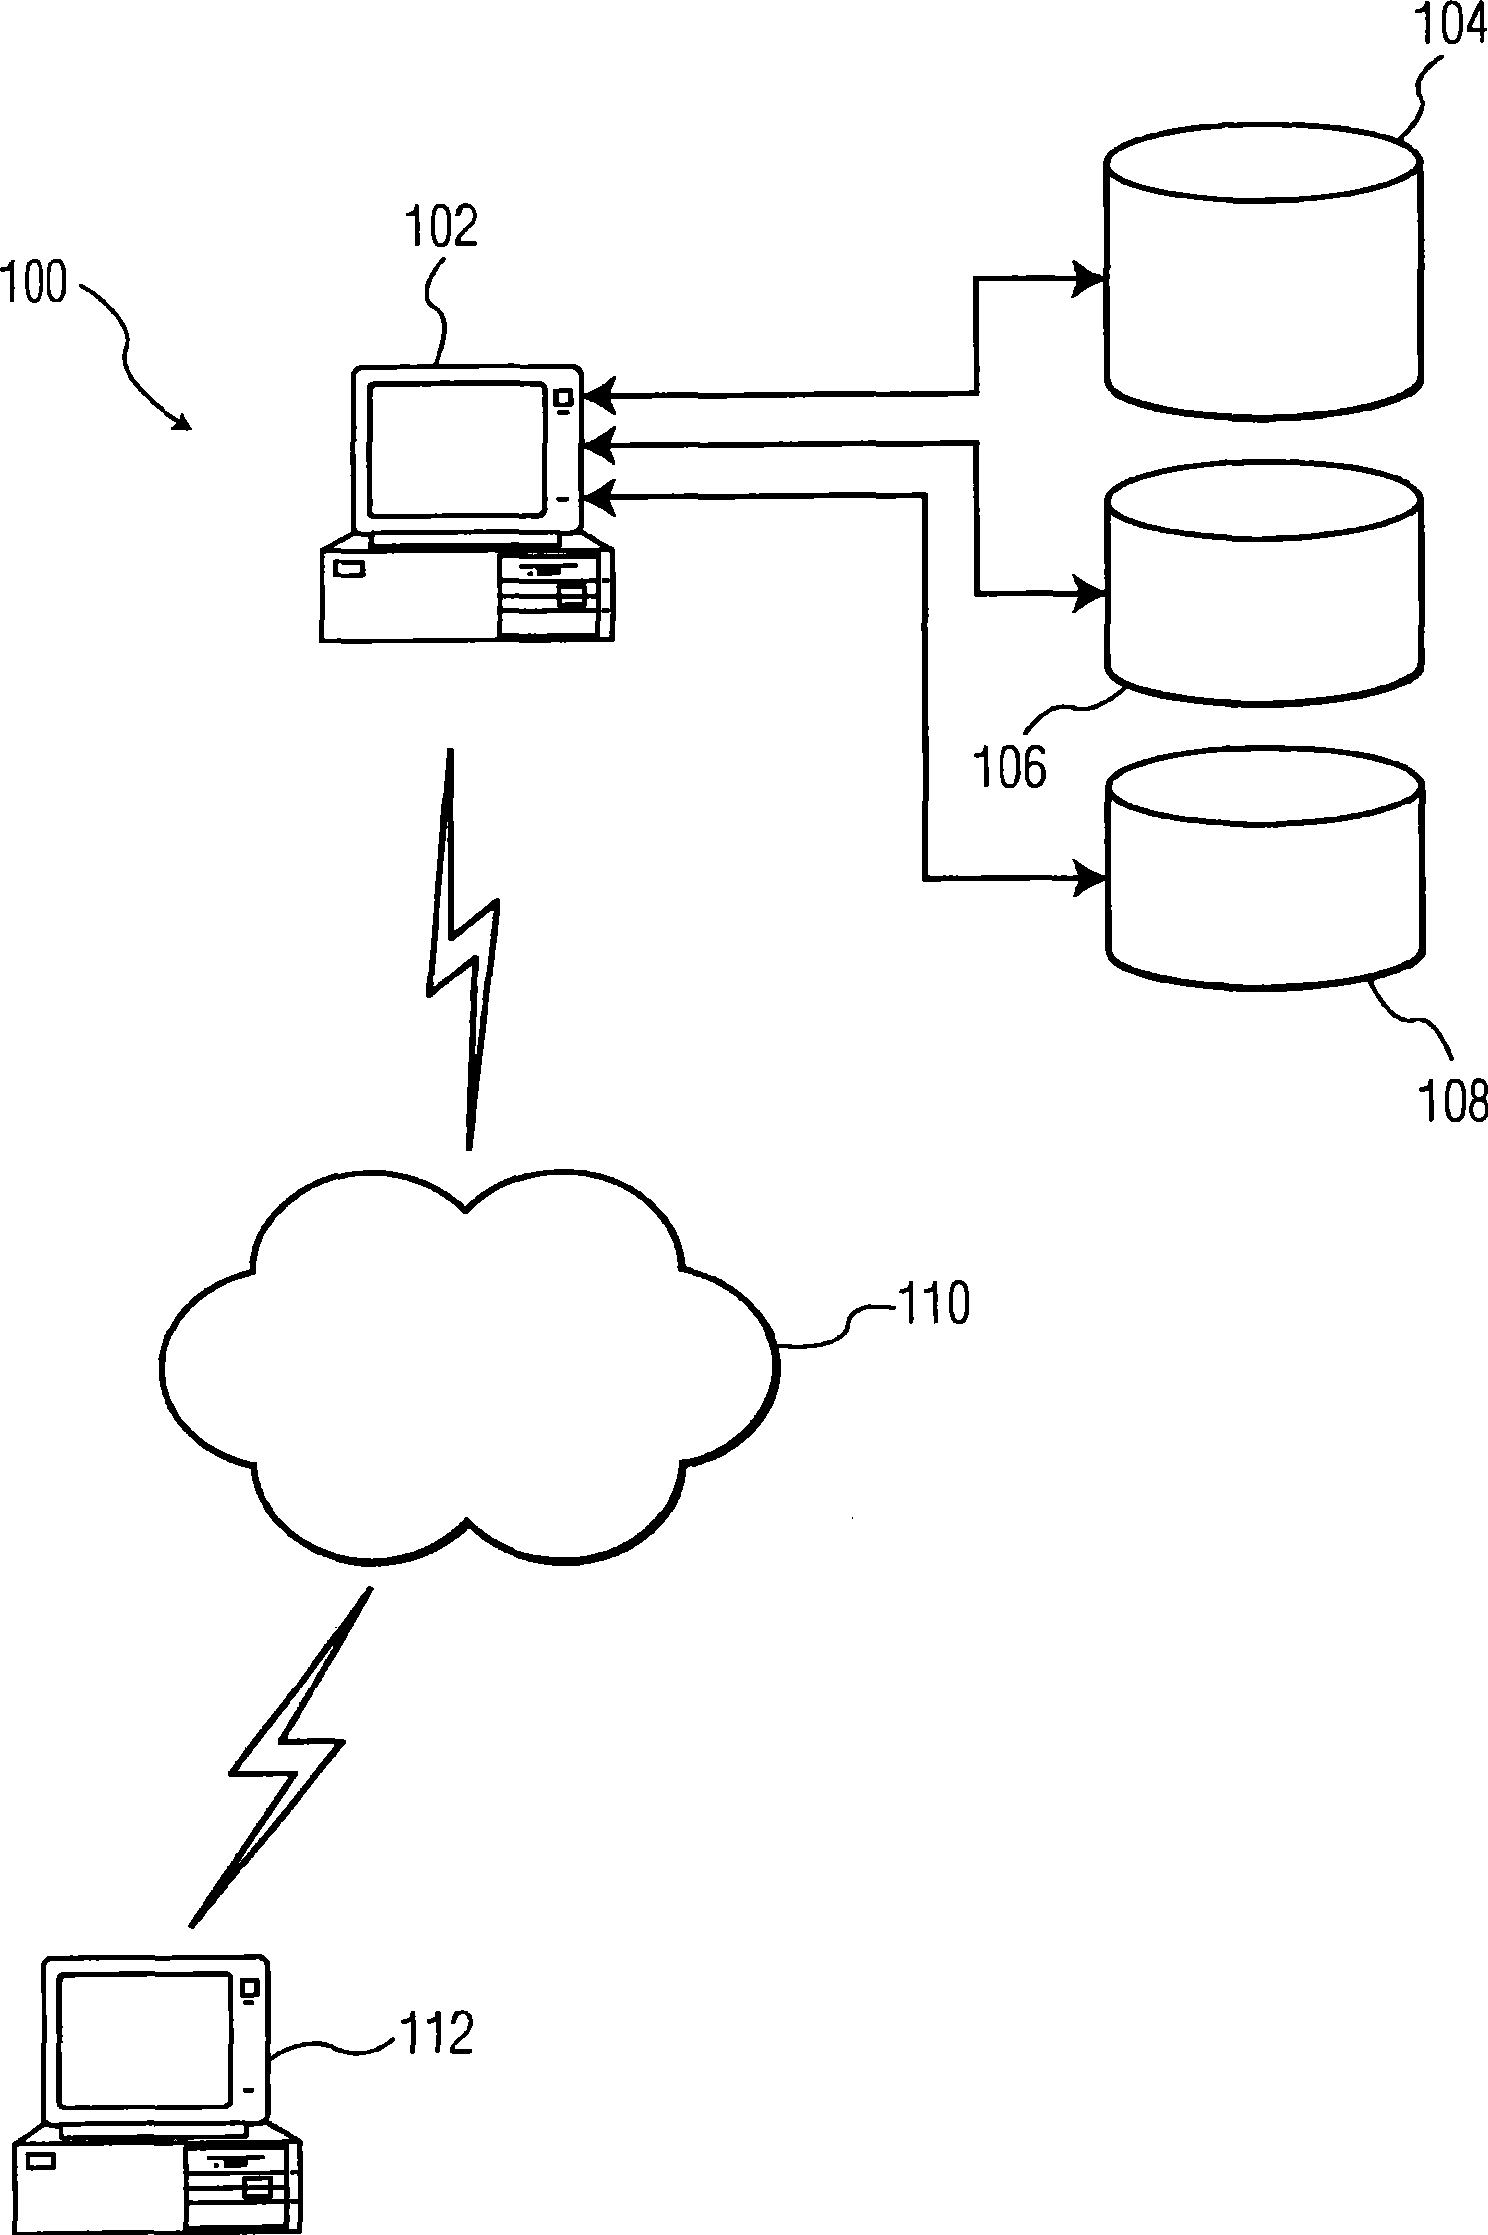 Display and method for medical procedure selection